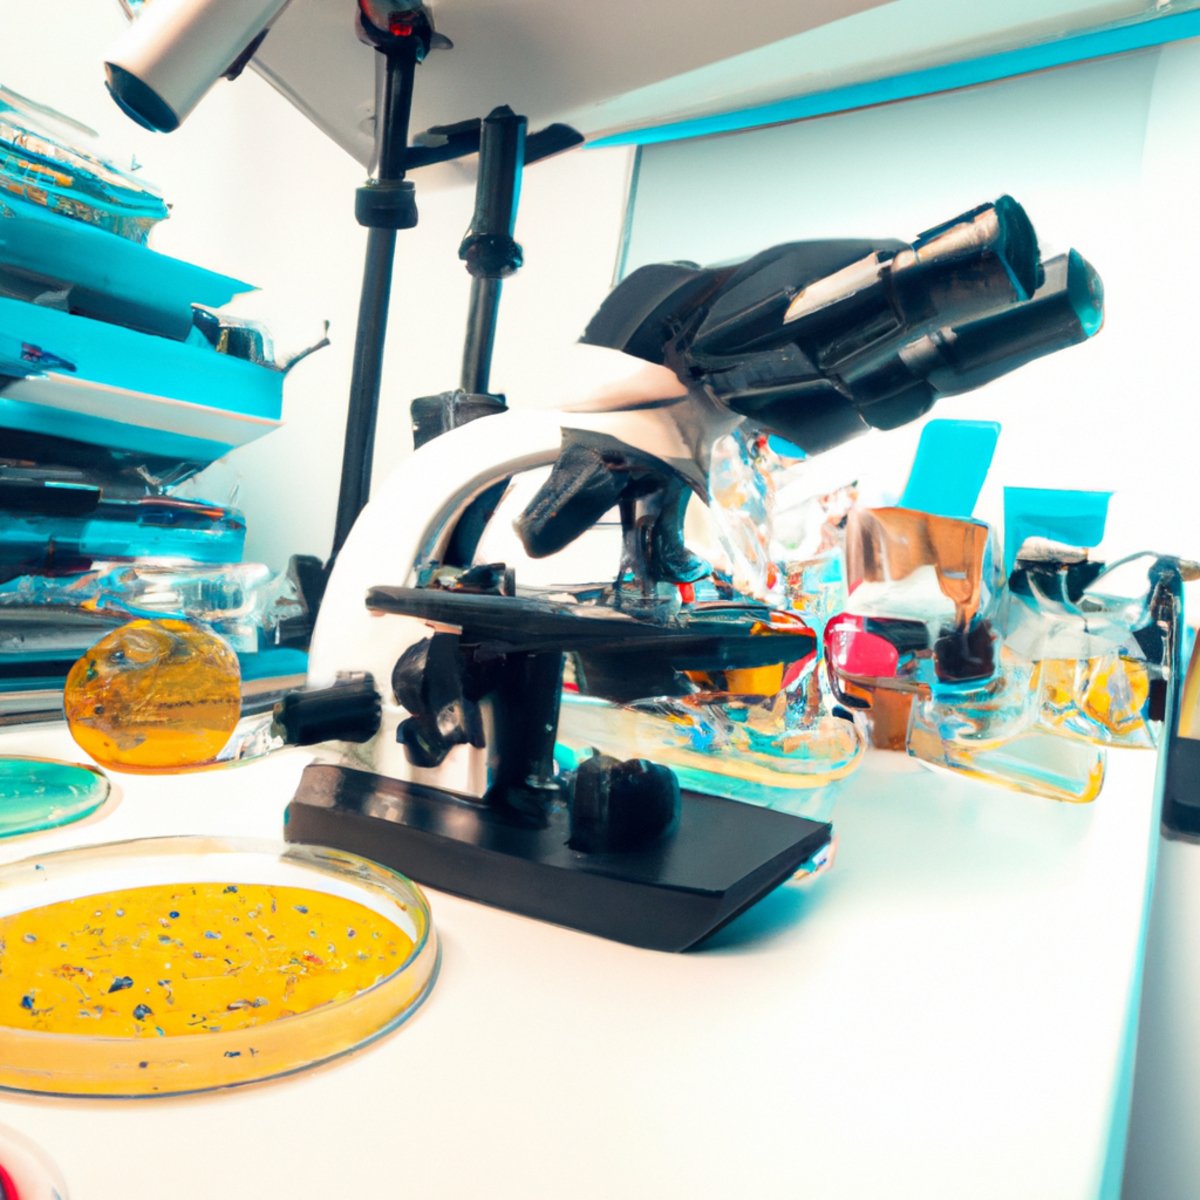 Cutting-edge lab equipment and microscope reveal vibrant, multi-colored substance in petri dish, symbolizing progress in cystic fibrosis research.